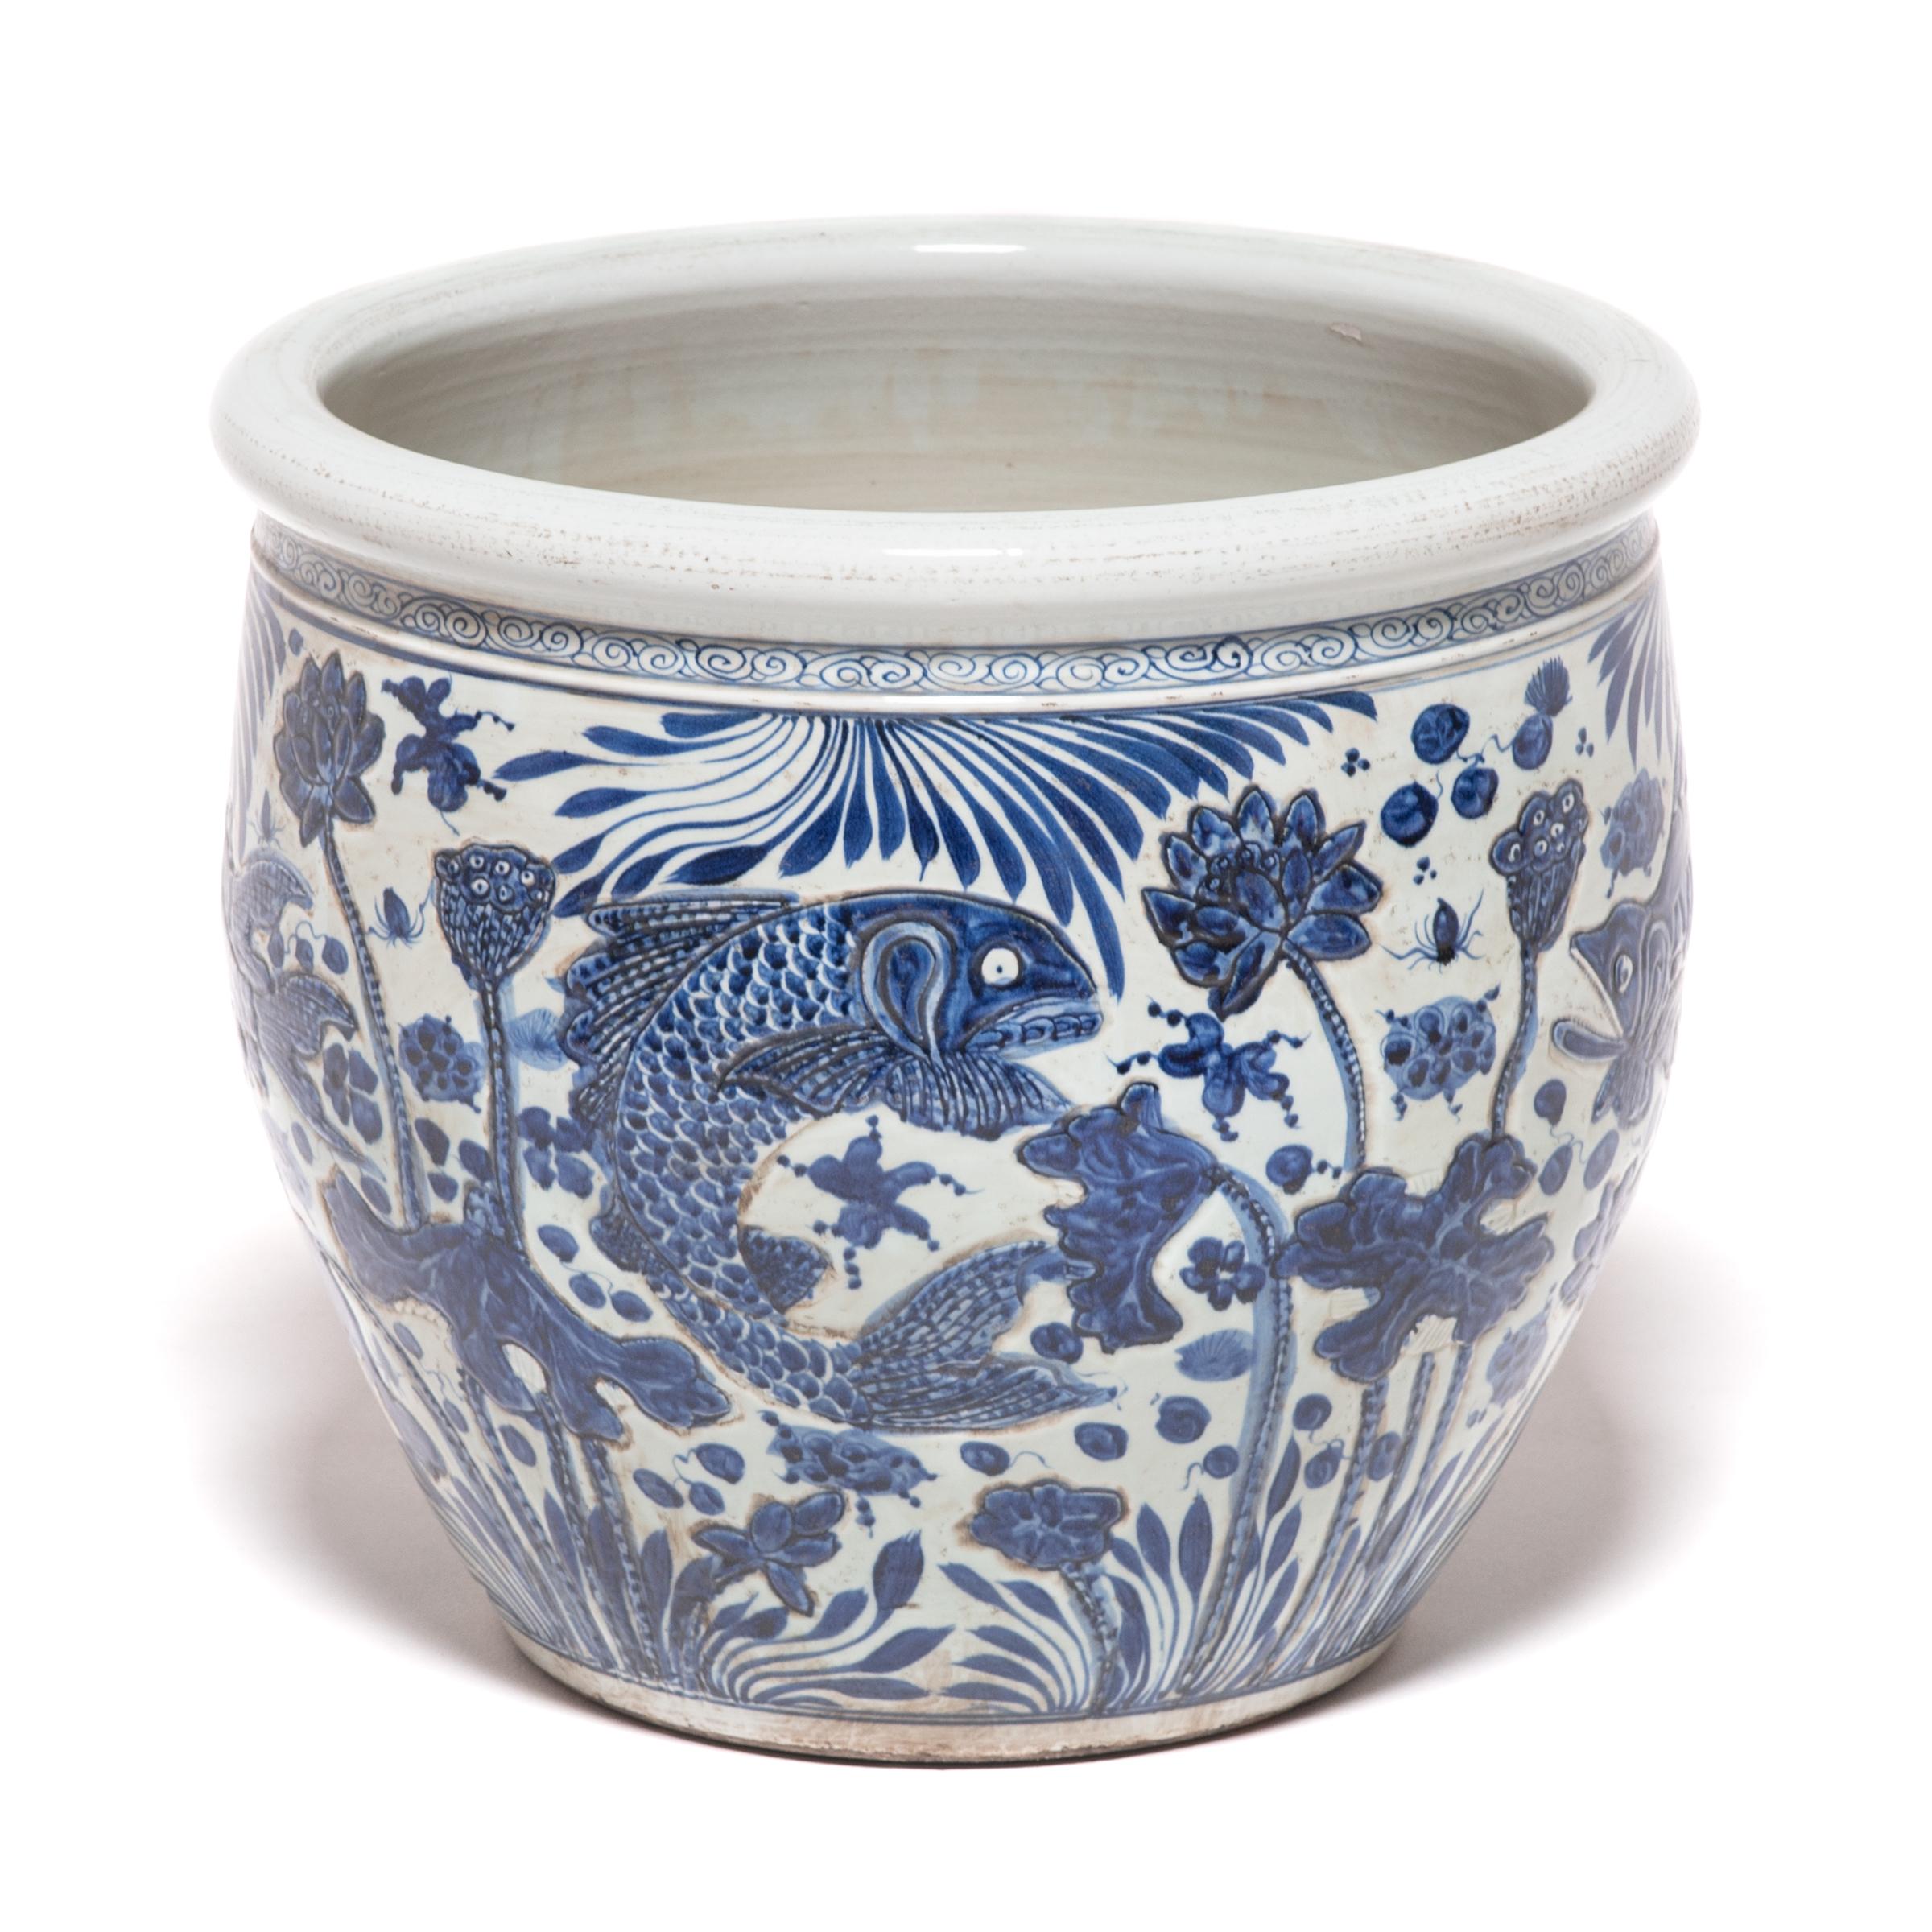 This grand, blue-and-white porcelain bowl is hand painted with flora and fauna of the sea, offering blessings of wealth, abundance, and the contented harmony of a fish in water. Chinese blue-and-white ceramics have inspired ceramists worldwide since